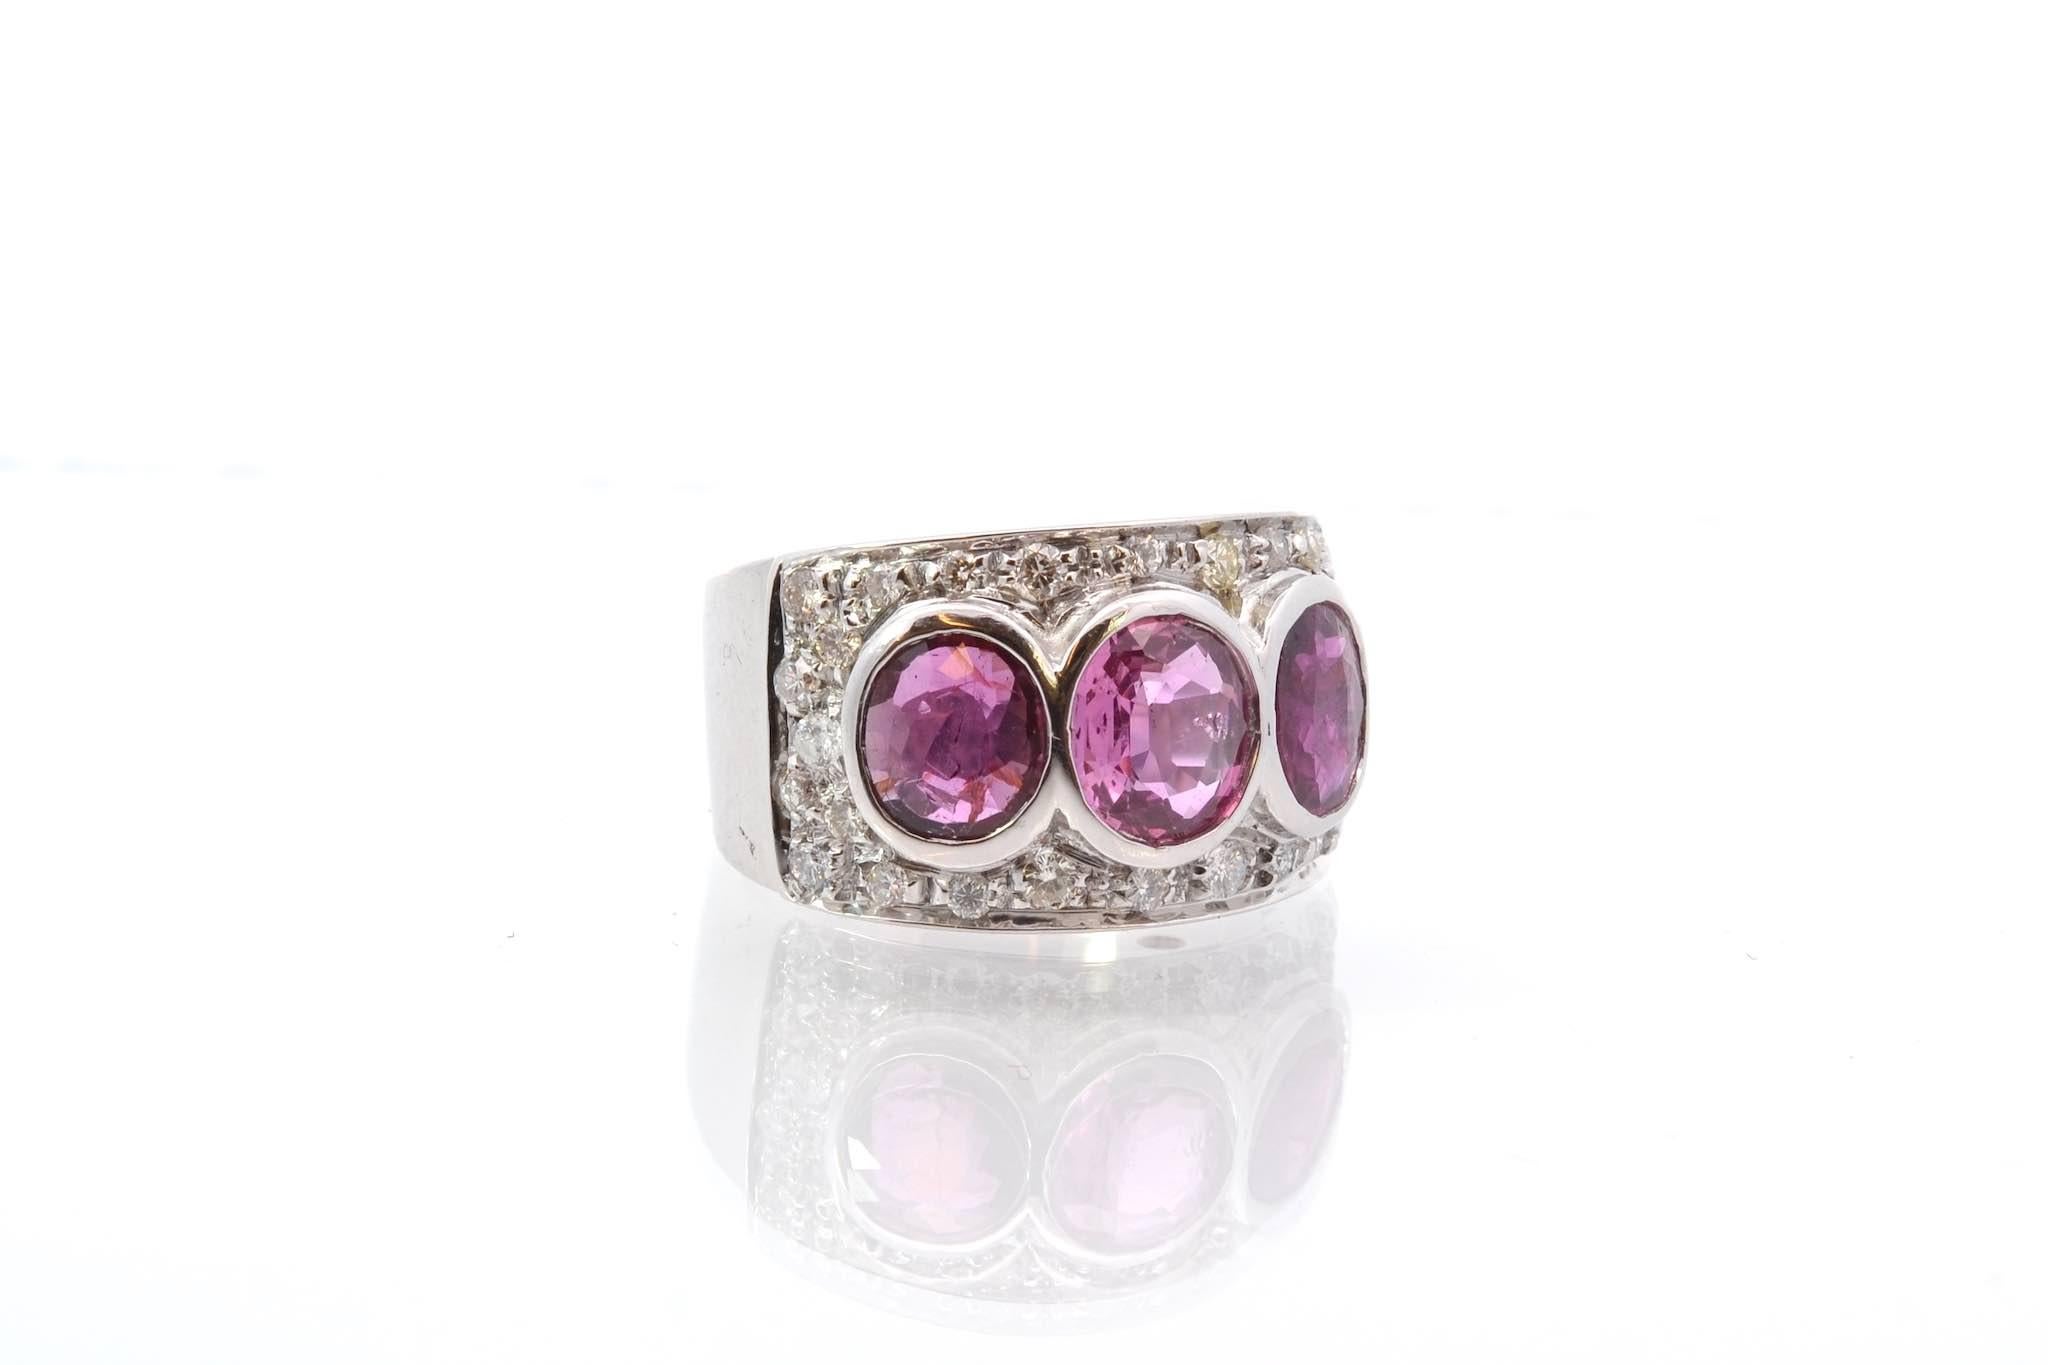 Oval Cut Pink sapphires and diamonds ring in 18k gold